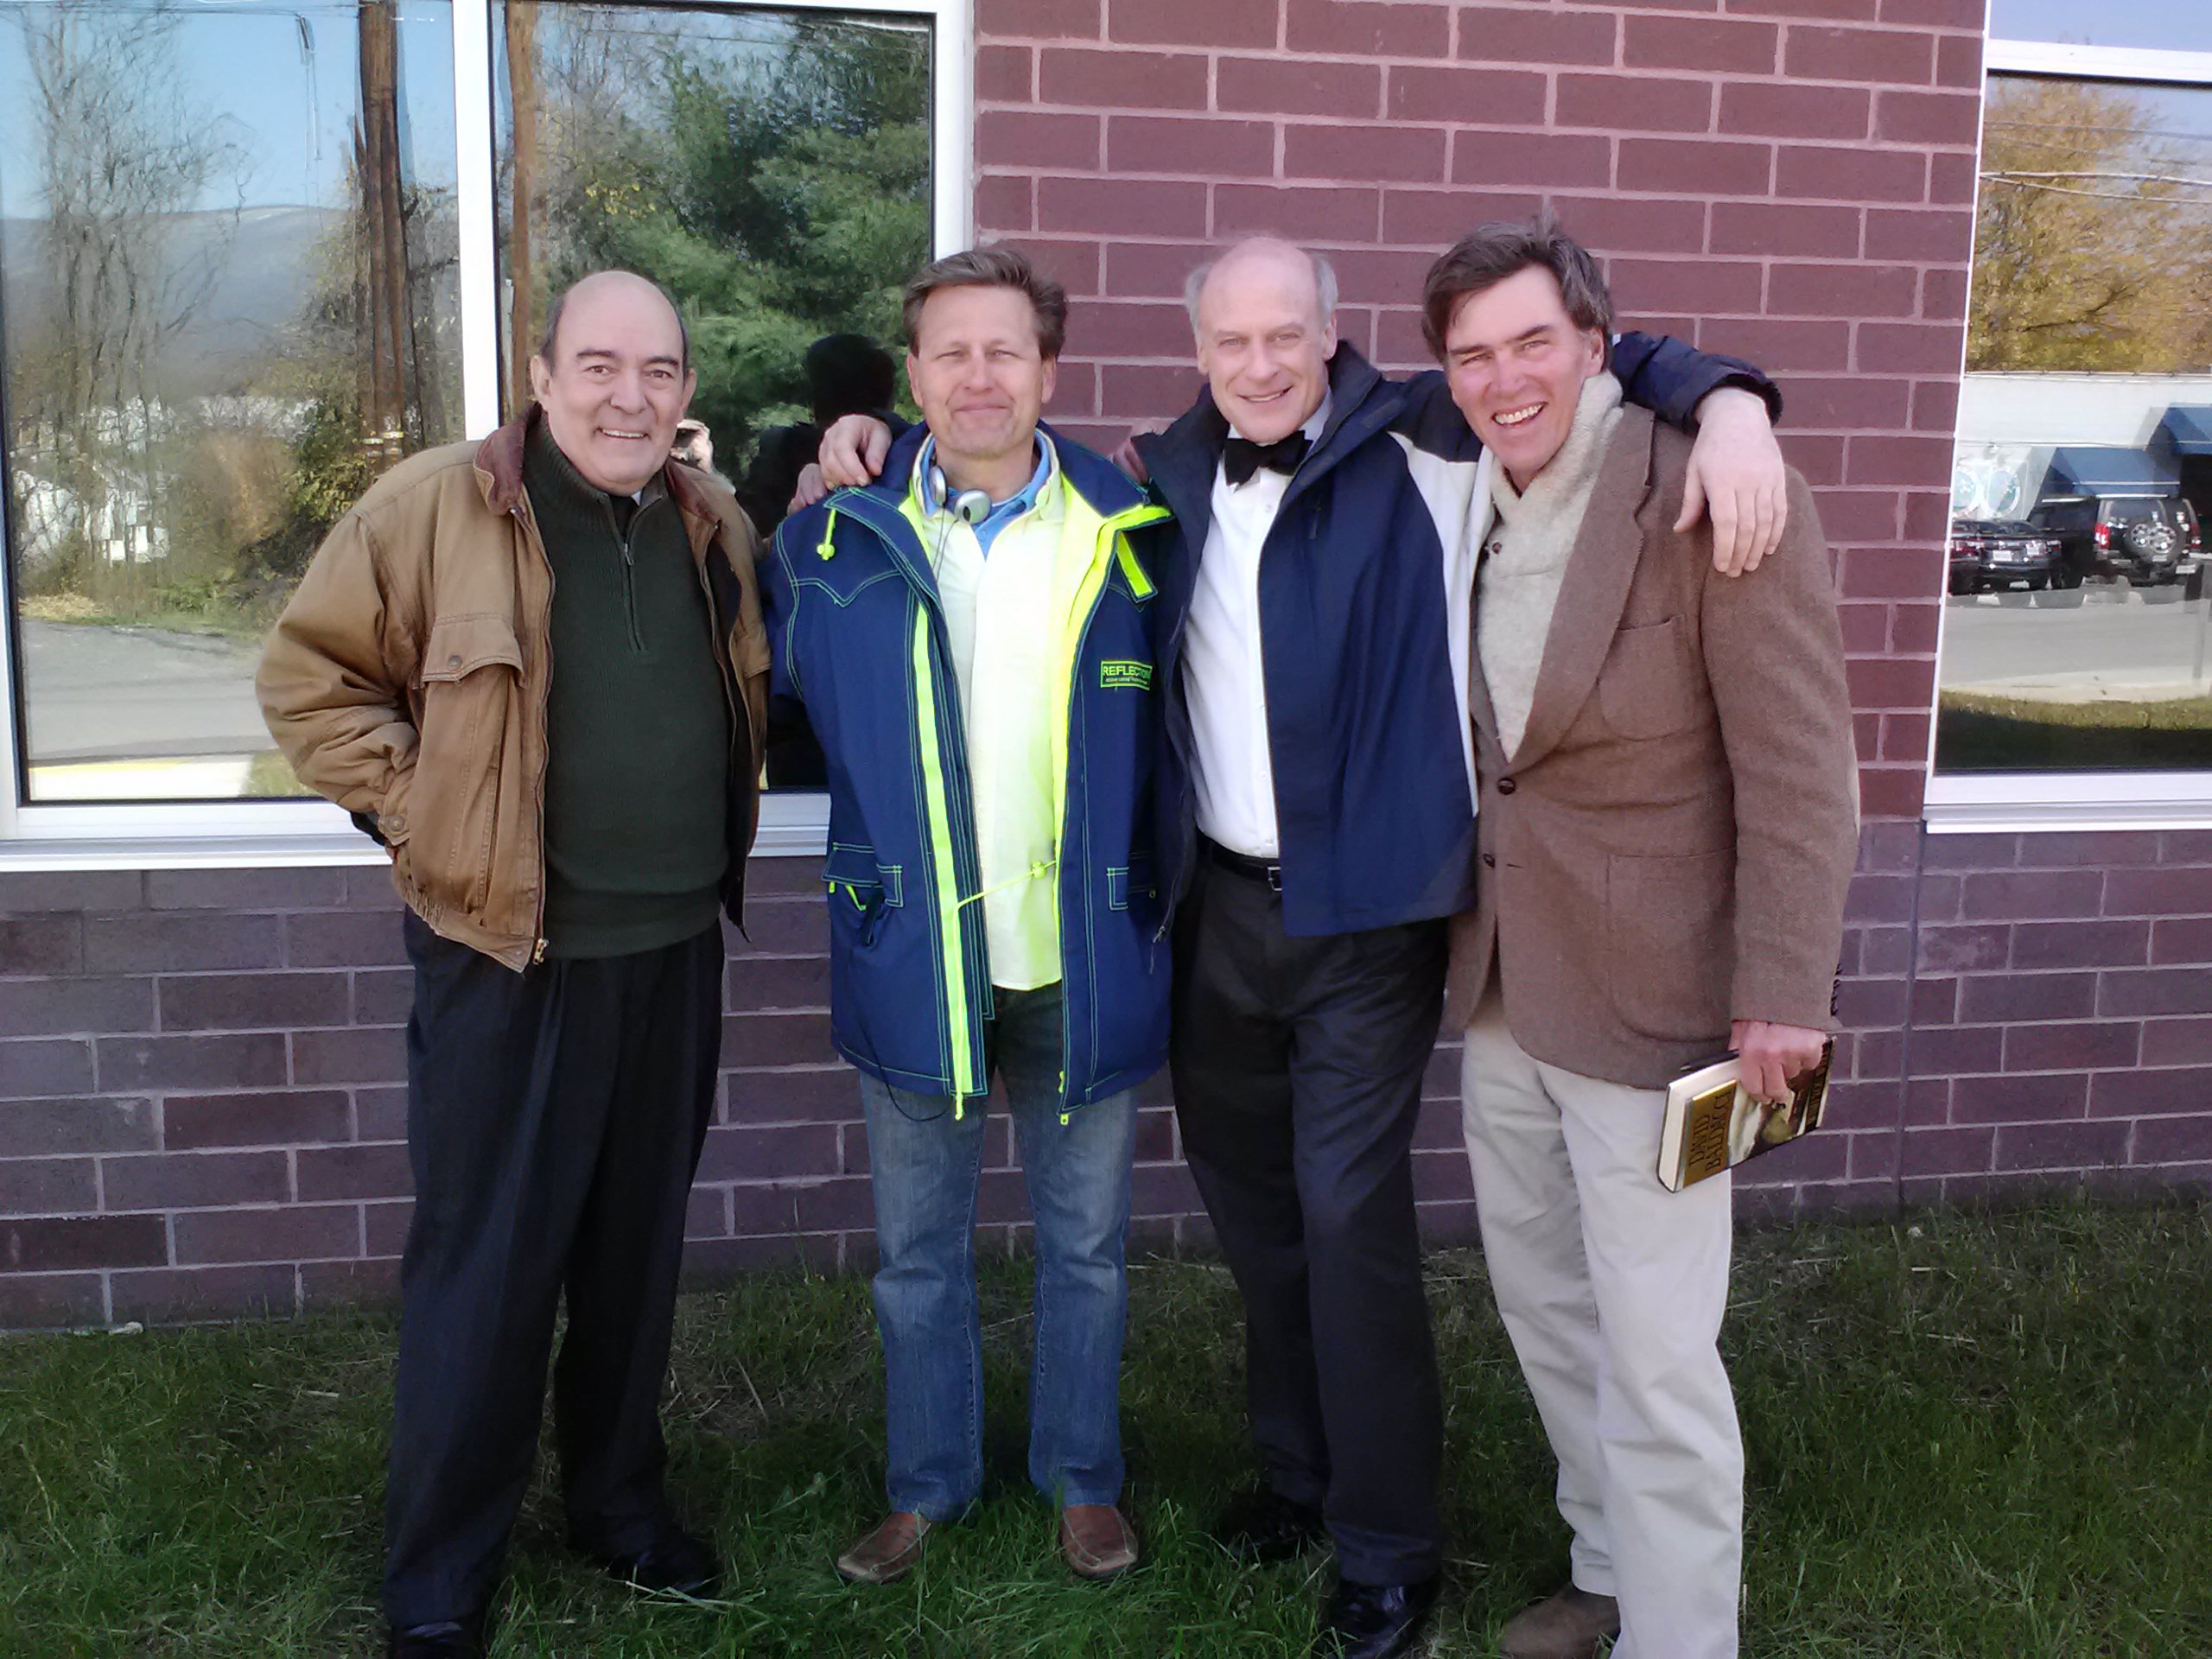 KEITH TYREE (far right) and David Baldacci (left center) on location for WISH YOU WELL (2013).